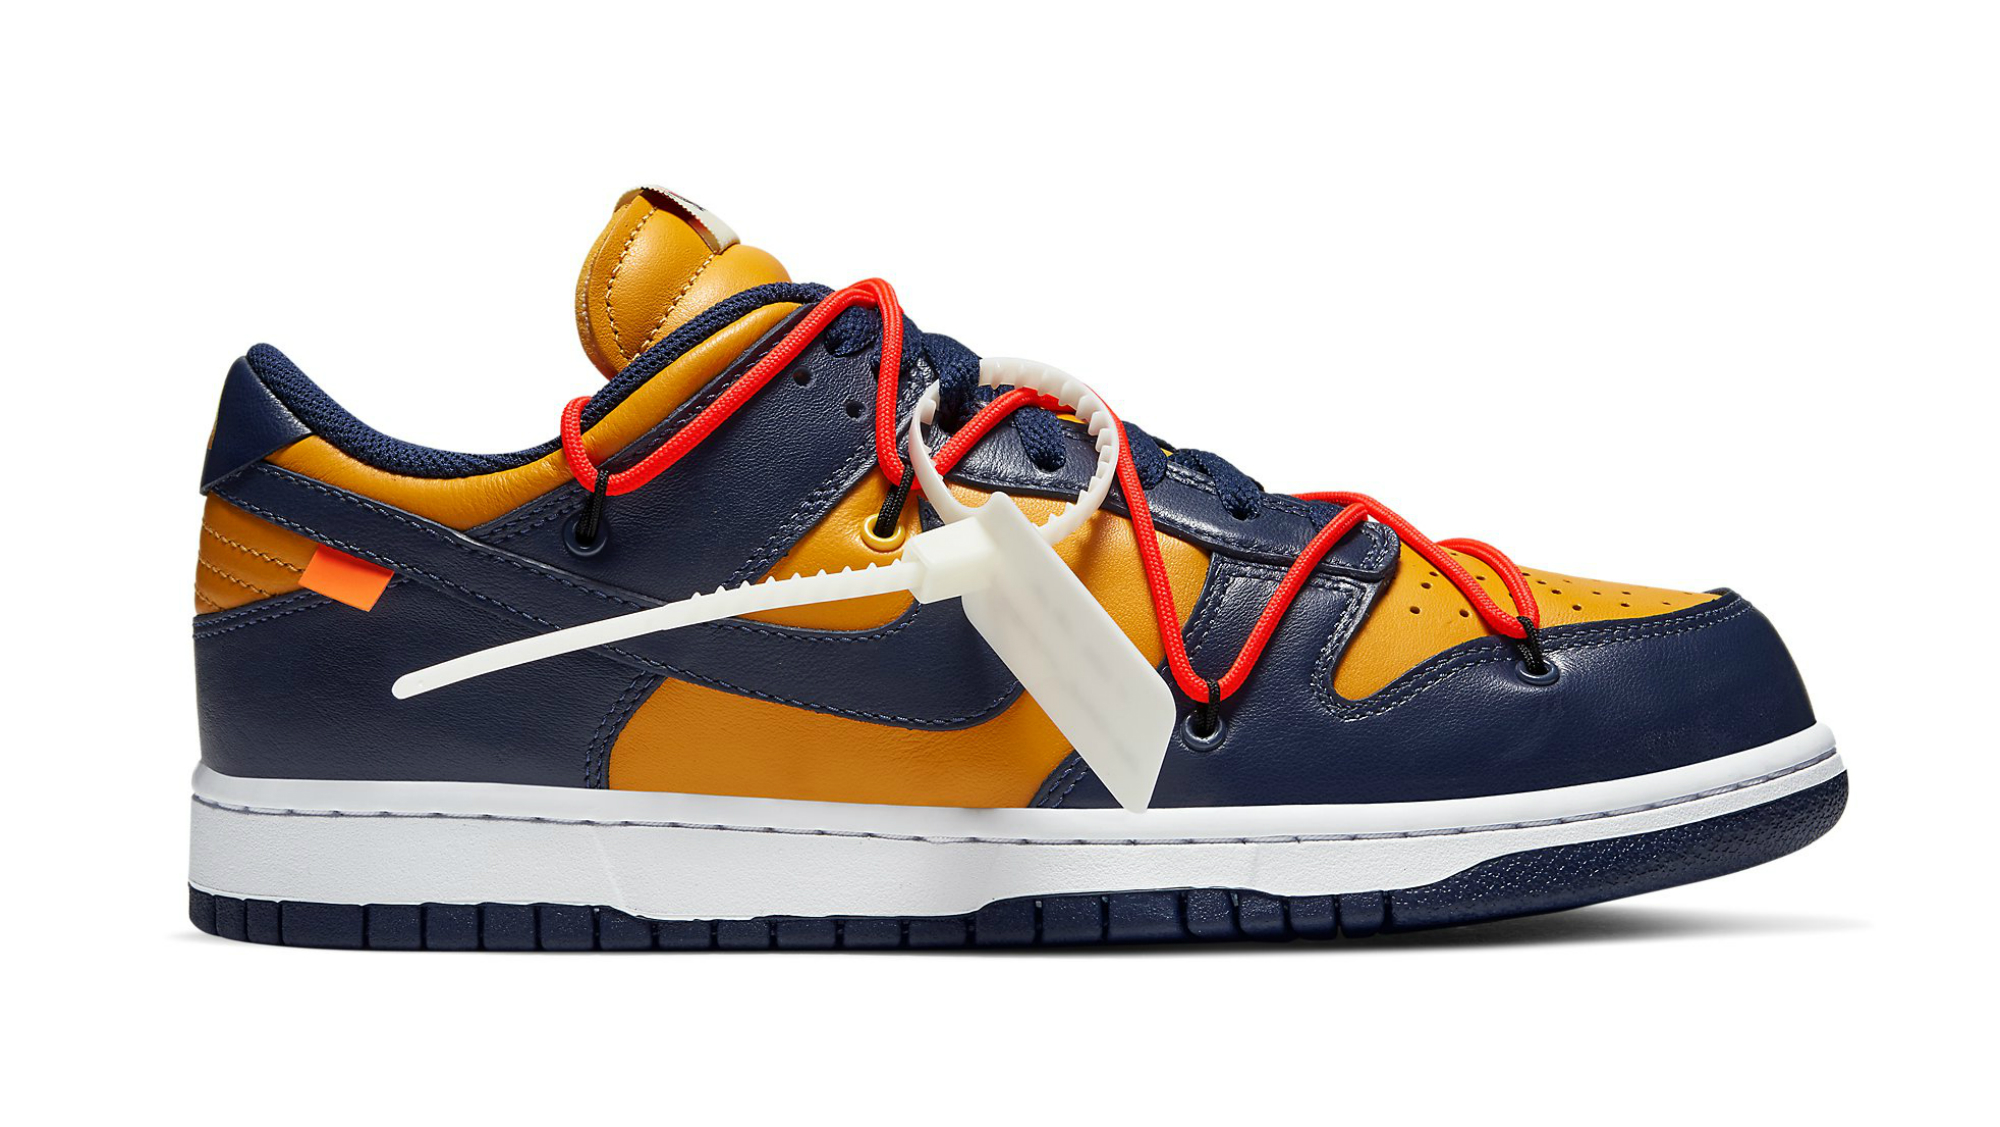 off white nike dunk low university gold midnight navy ct0856 700 release date